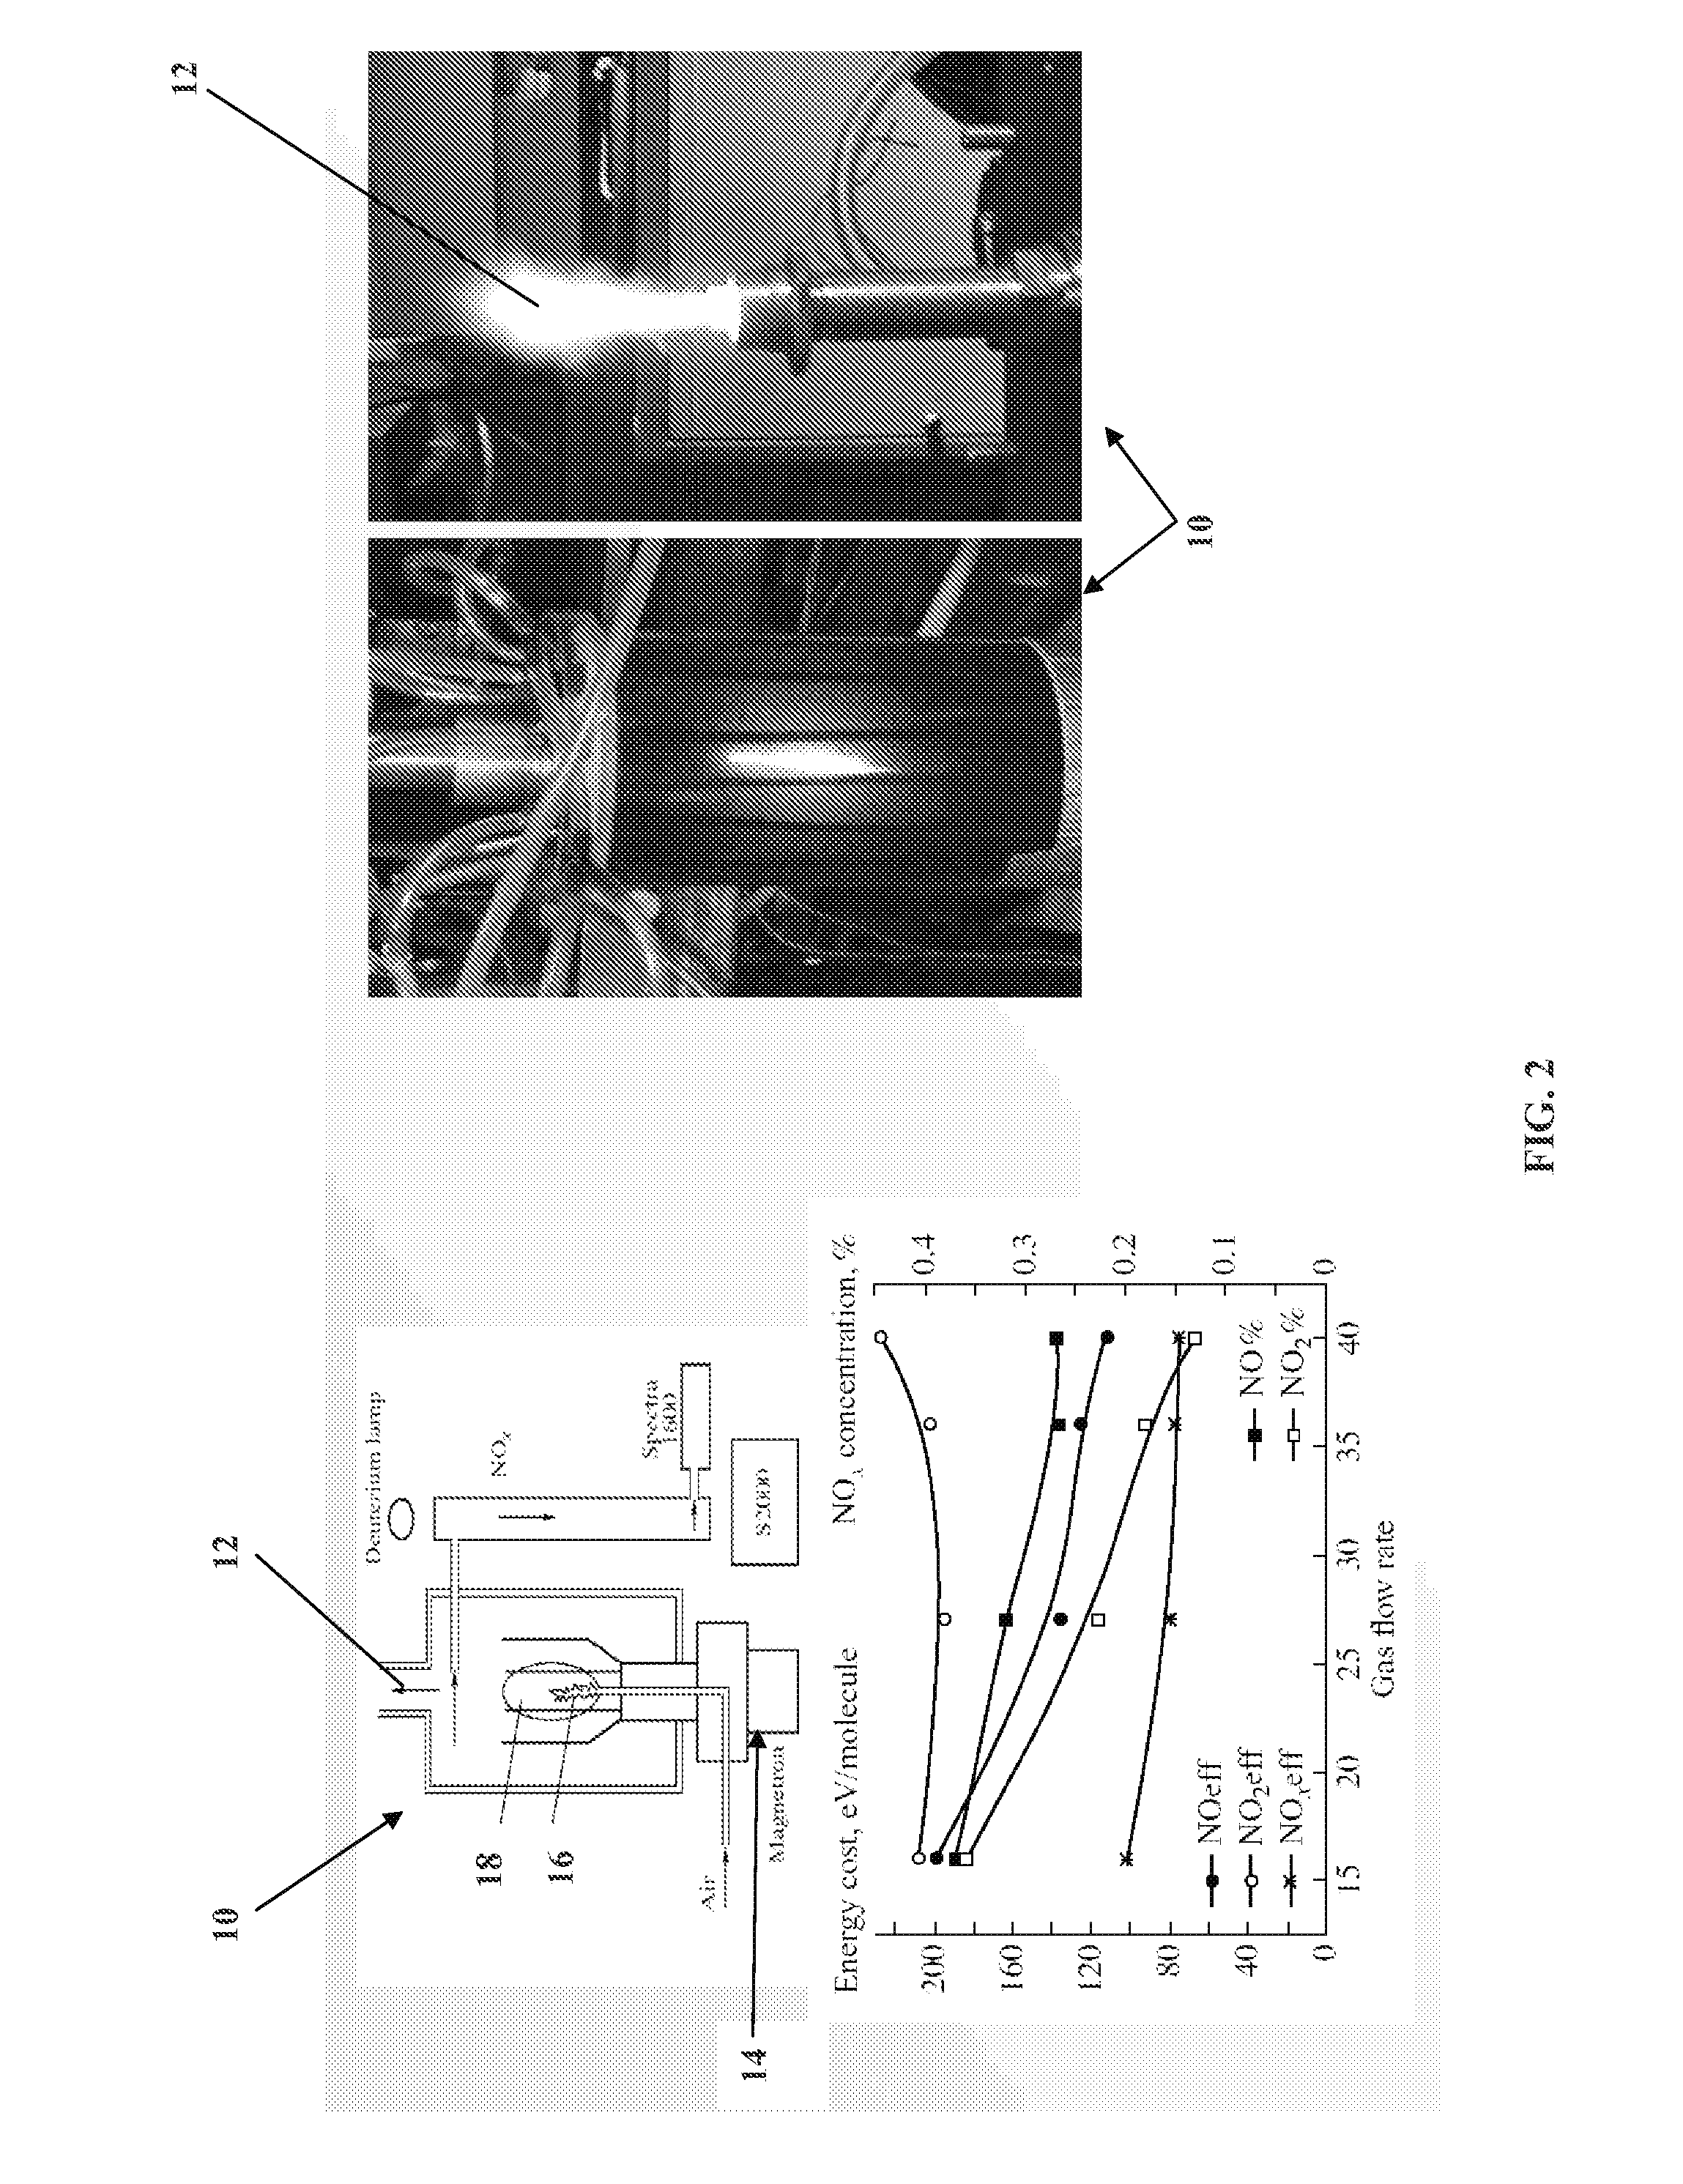 Methods for using nitric oxide in a plasma state to treat medical conditions and diseases